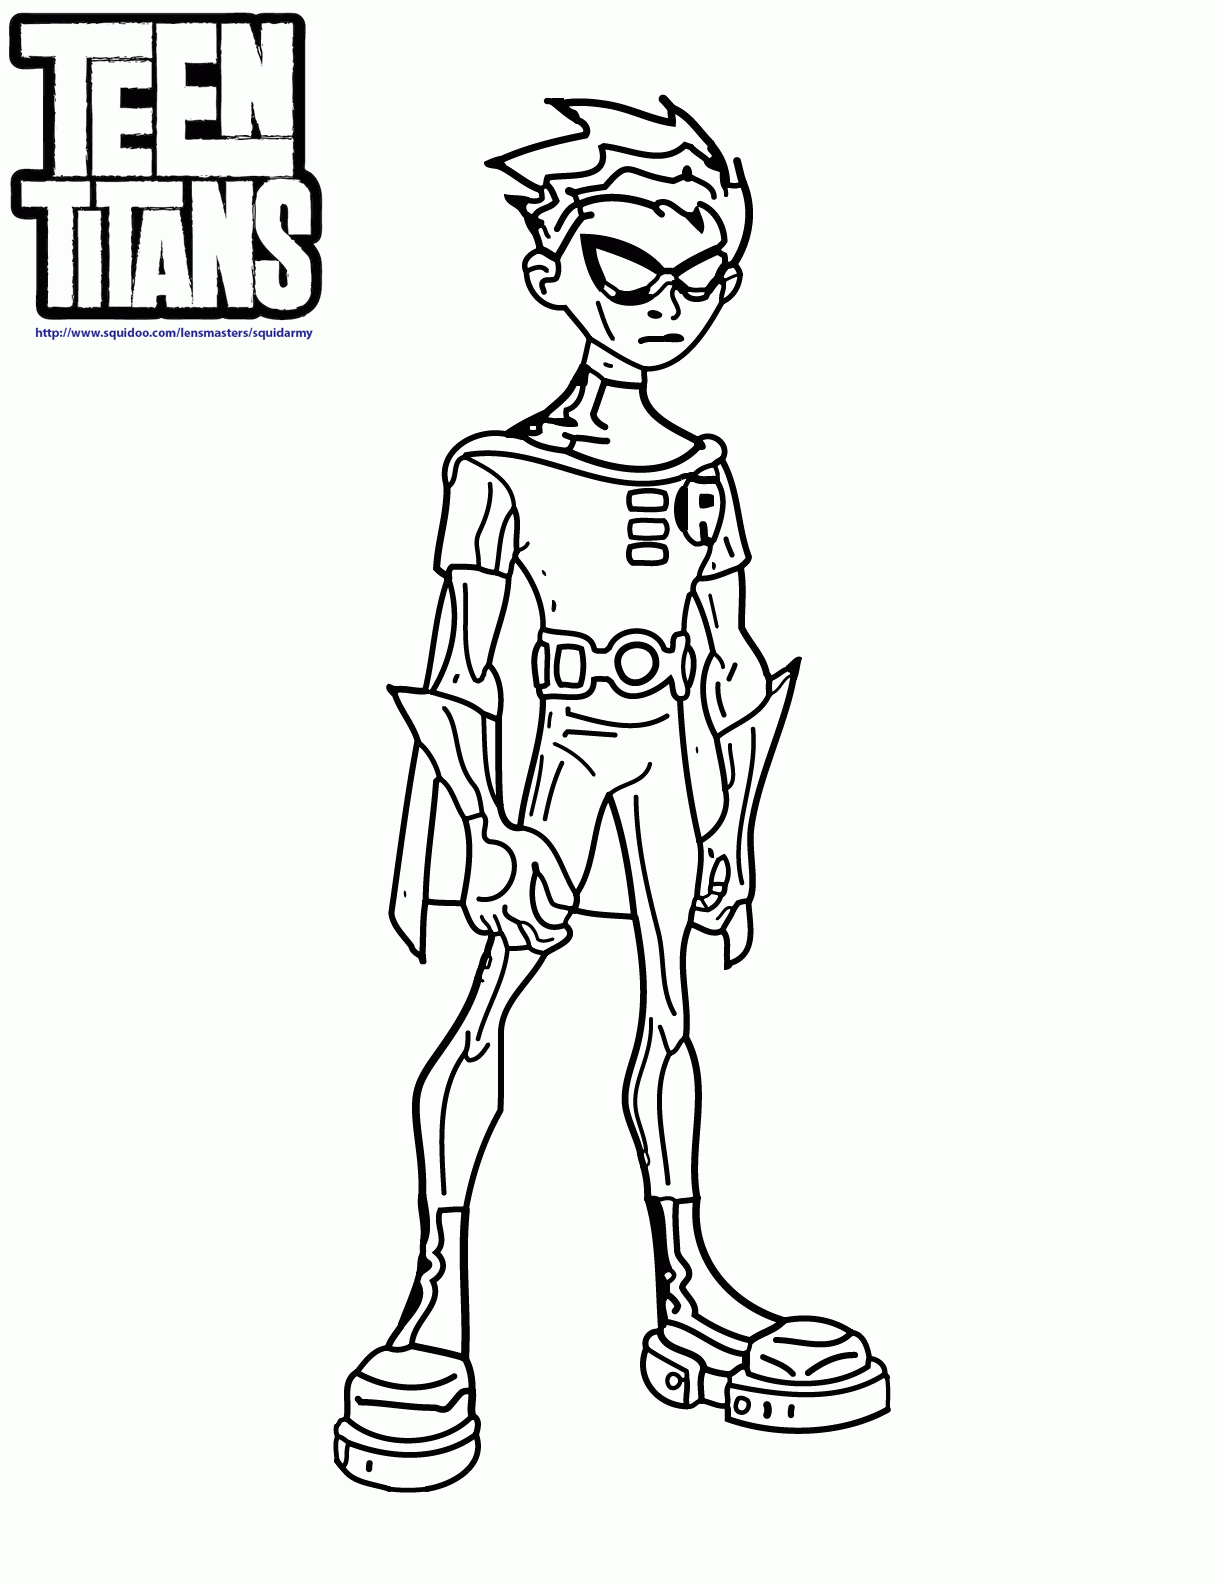 teen-titans-coloring-page-0073-q1